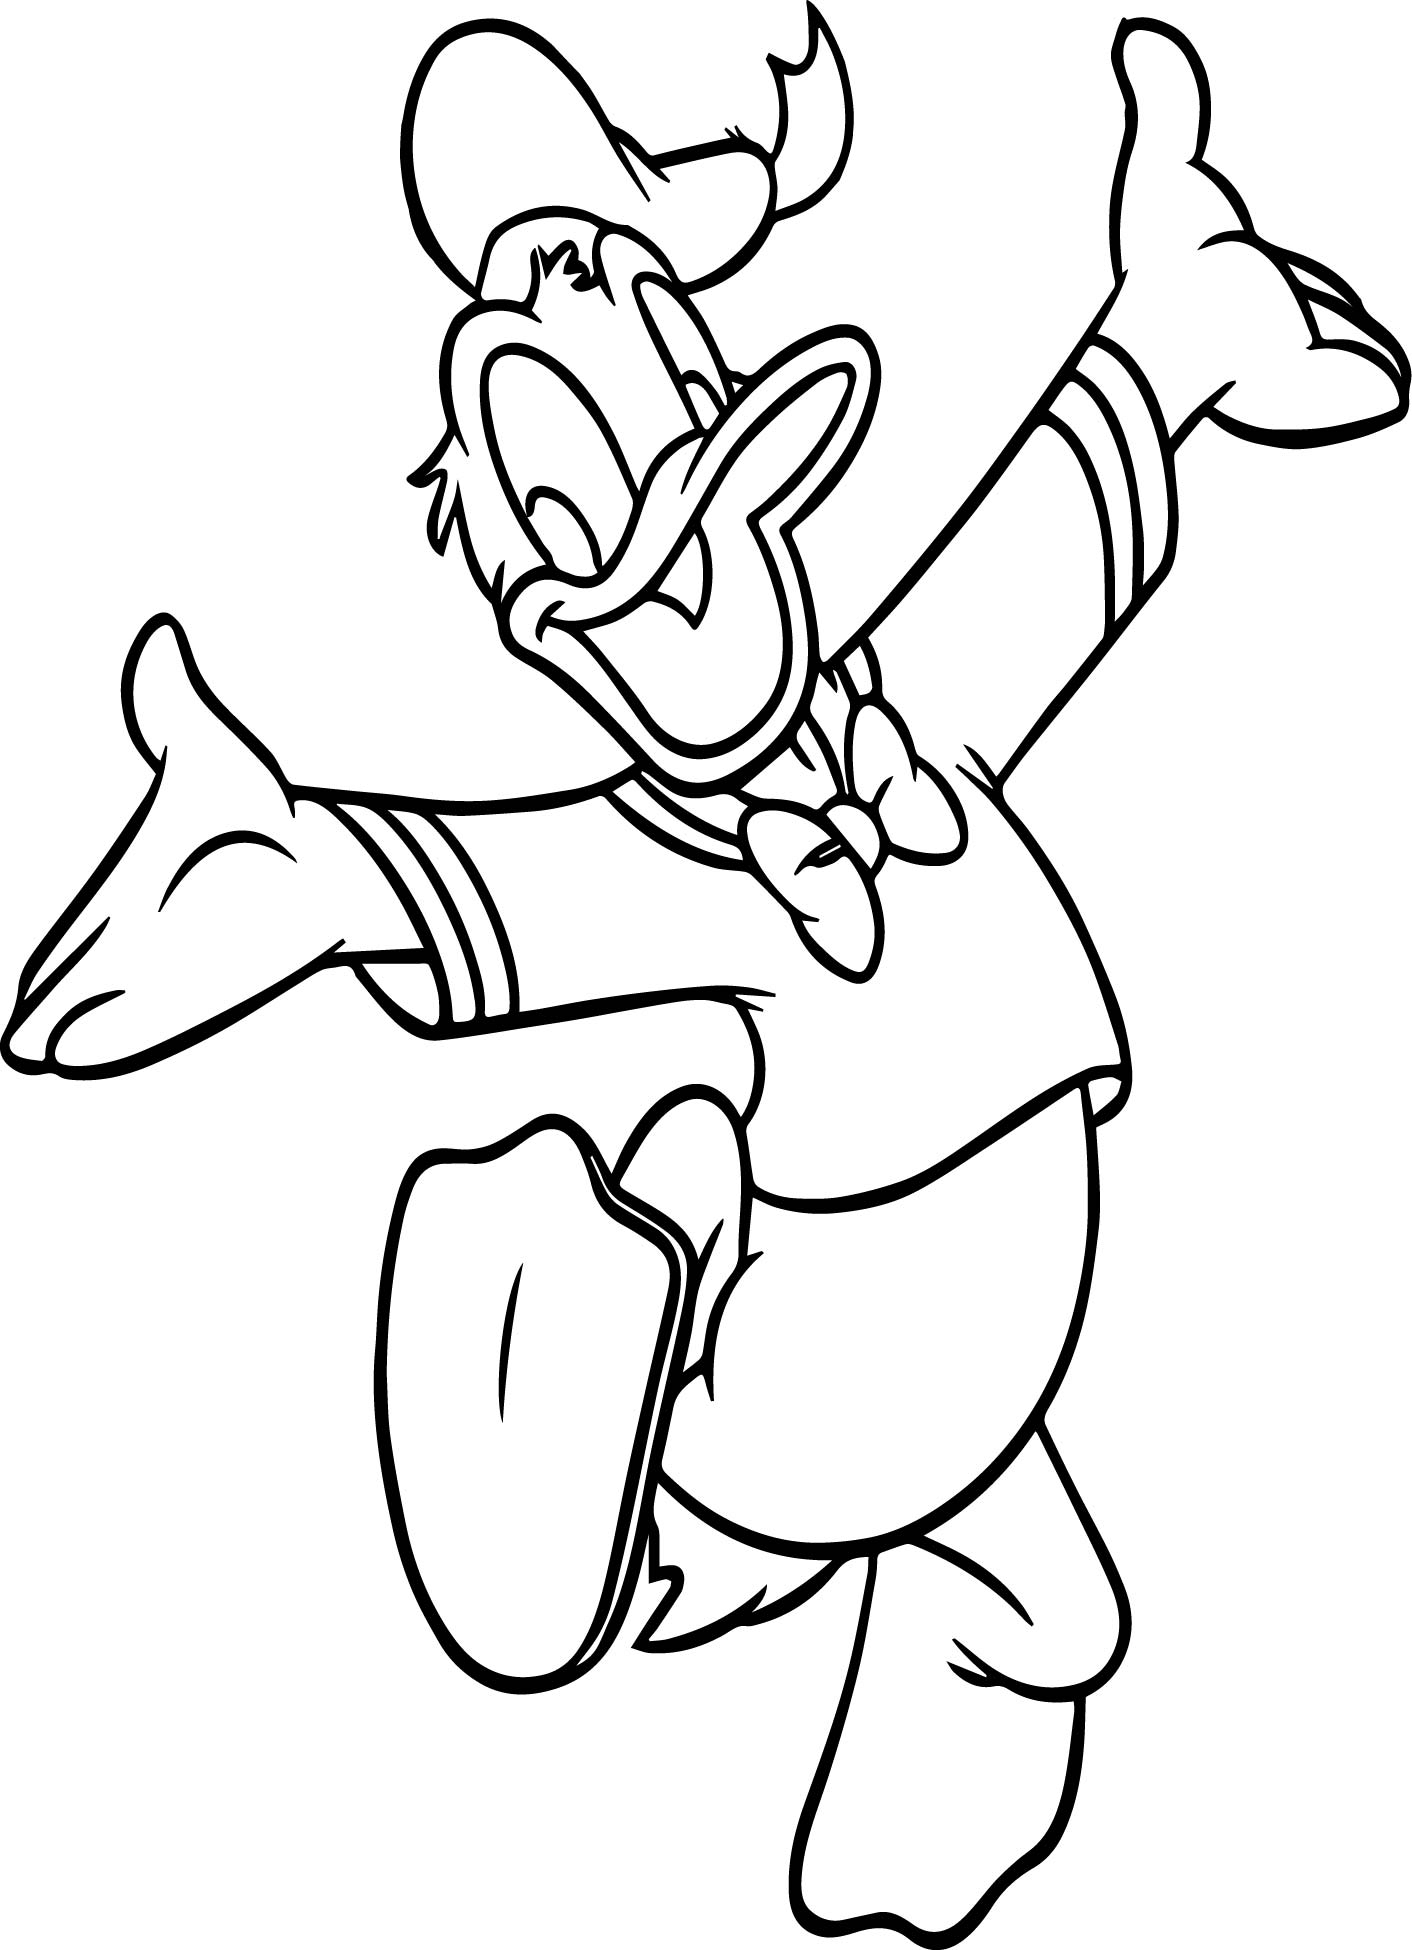 walt-disney-characters-coloring-pages-at-getcoloringscom-free